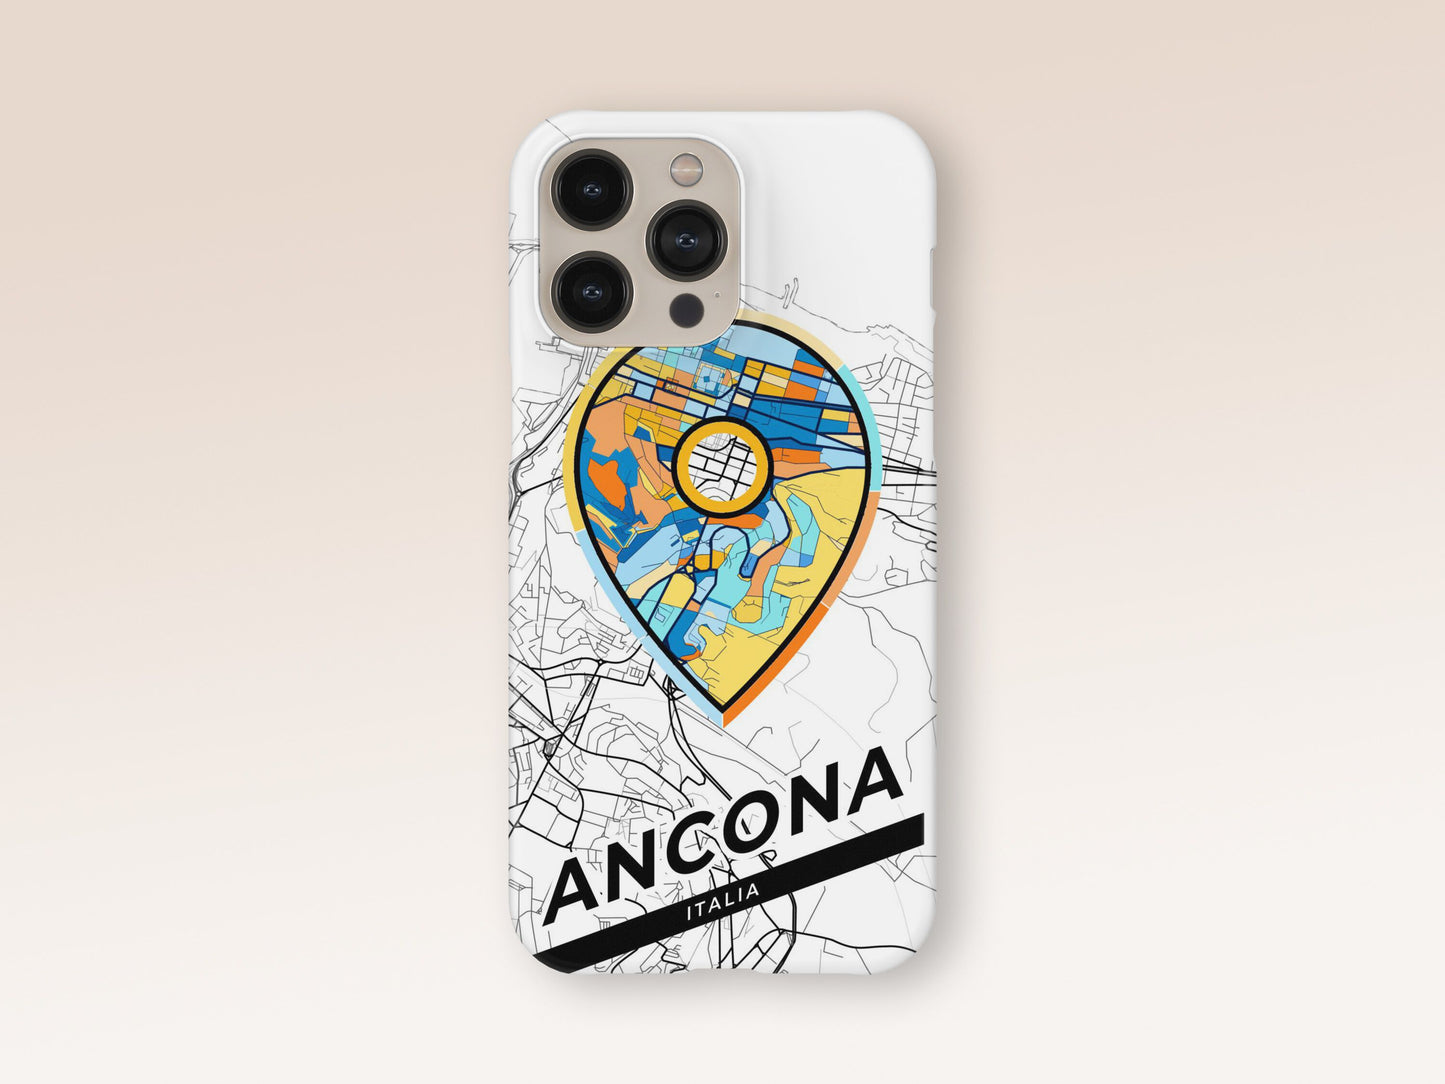 Ancona Italy slim phone case with colorful icon. Birthday, wedding or housewarming gift. Couple match cases. 1